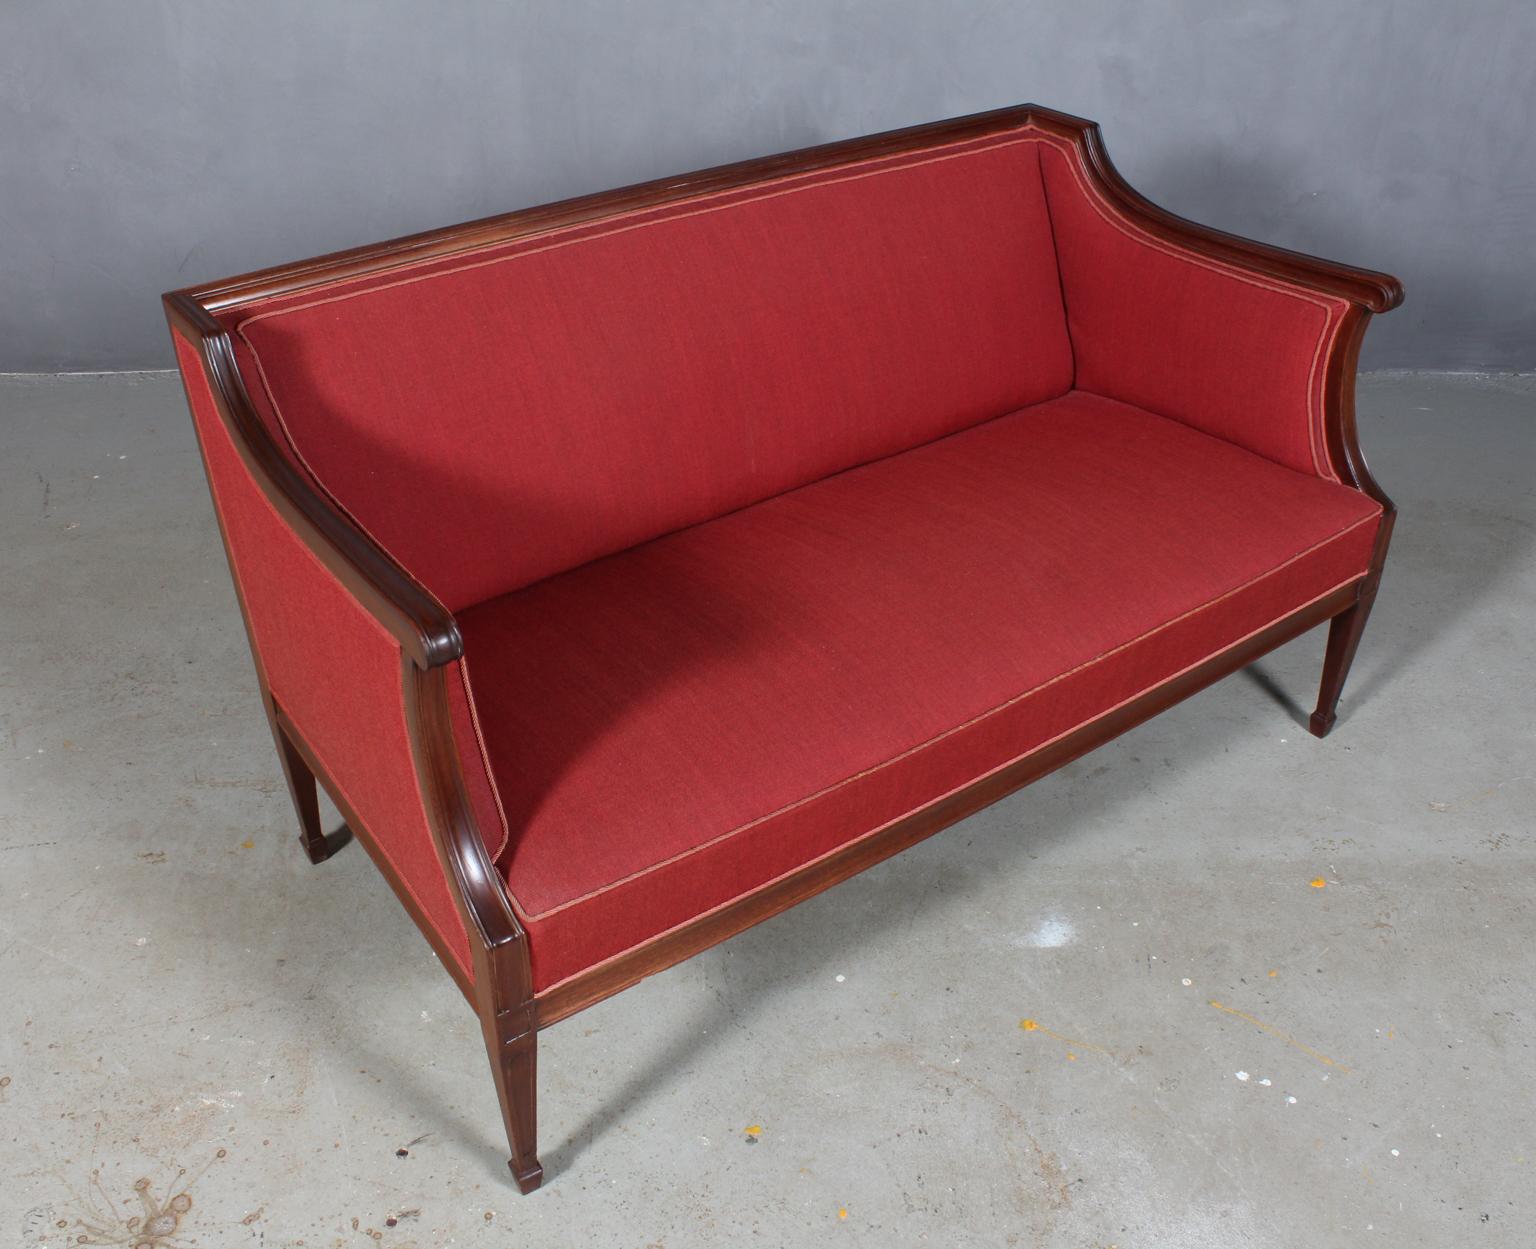 Frits Henningsen two-seat sofa in mahogany.

Upholstered with red wool.

Designed in the 1930s, made by Frits Henningsen.
     